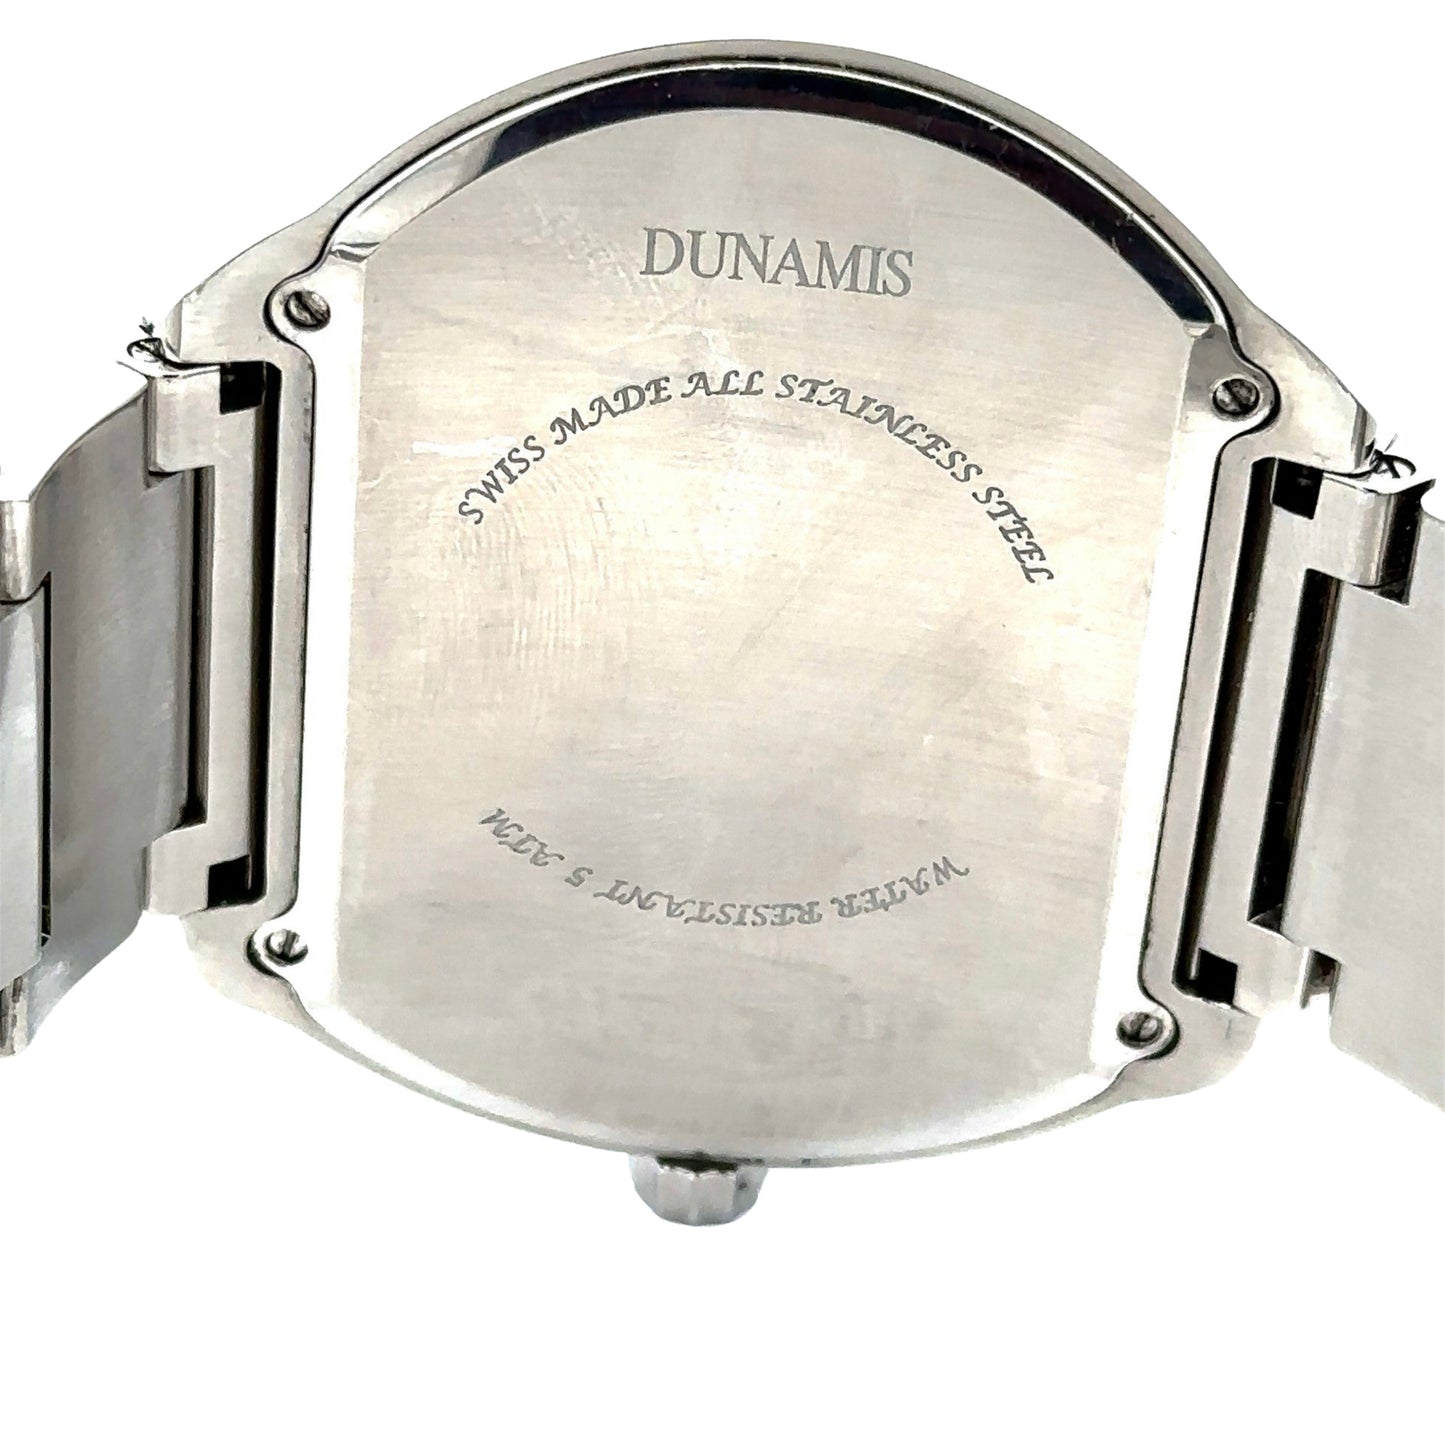 Back of watch case with "Dunamis" "swiss made all stainless steel" "water resistant 5 ATM"